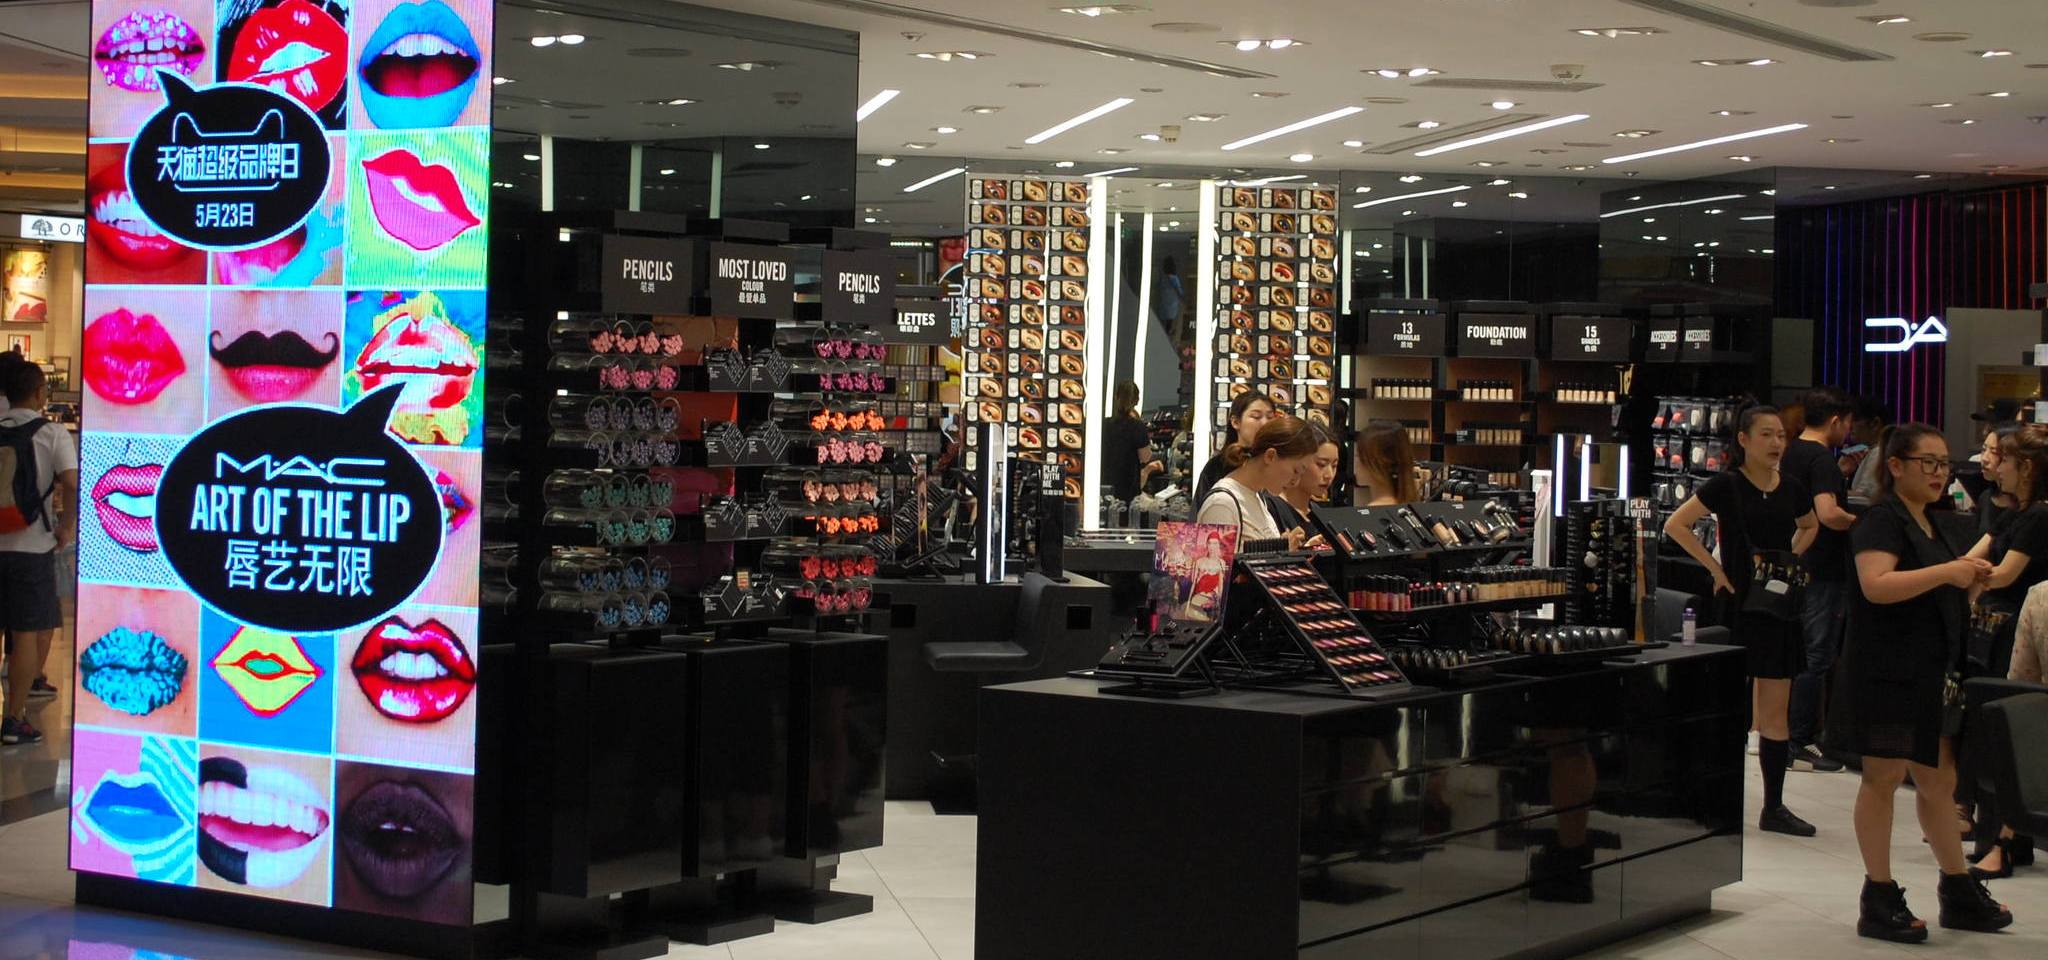 The High-End Cosmetics Market in China